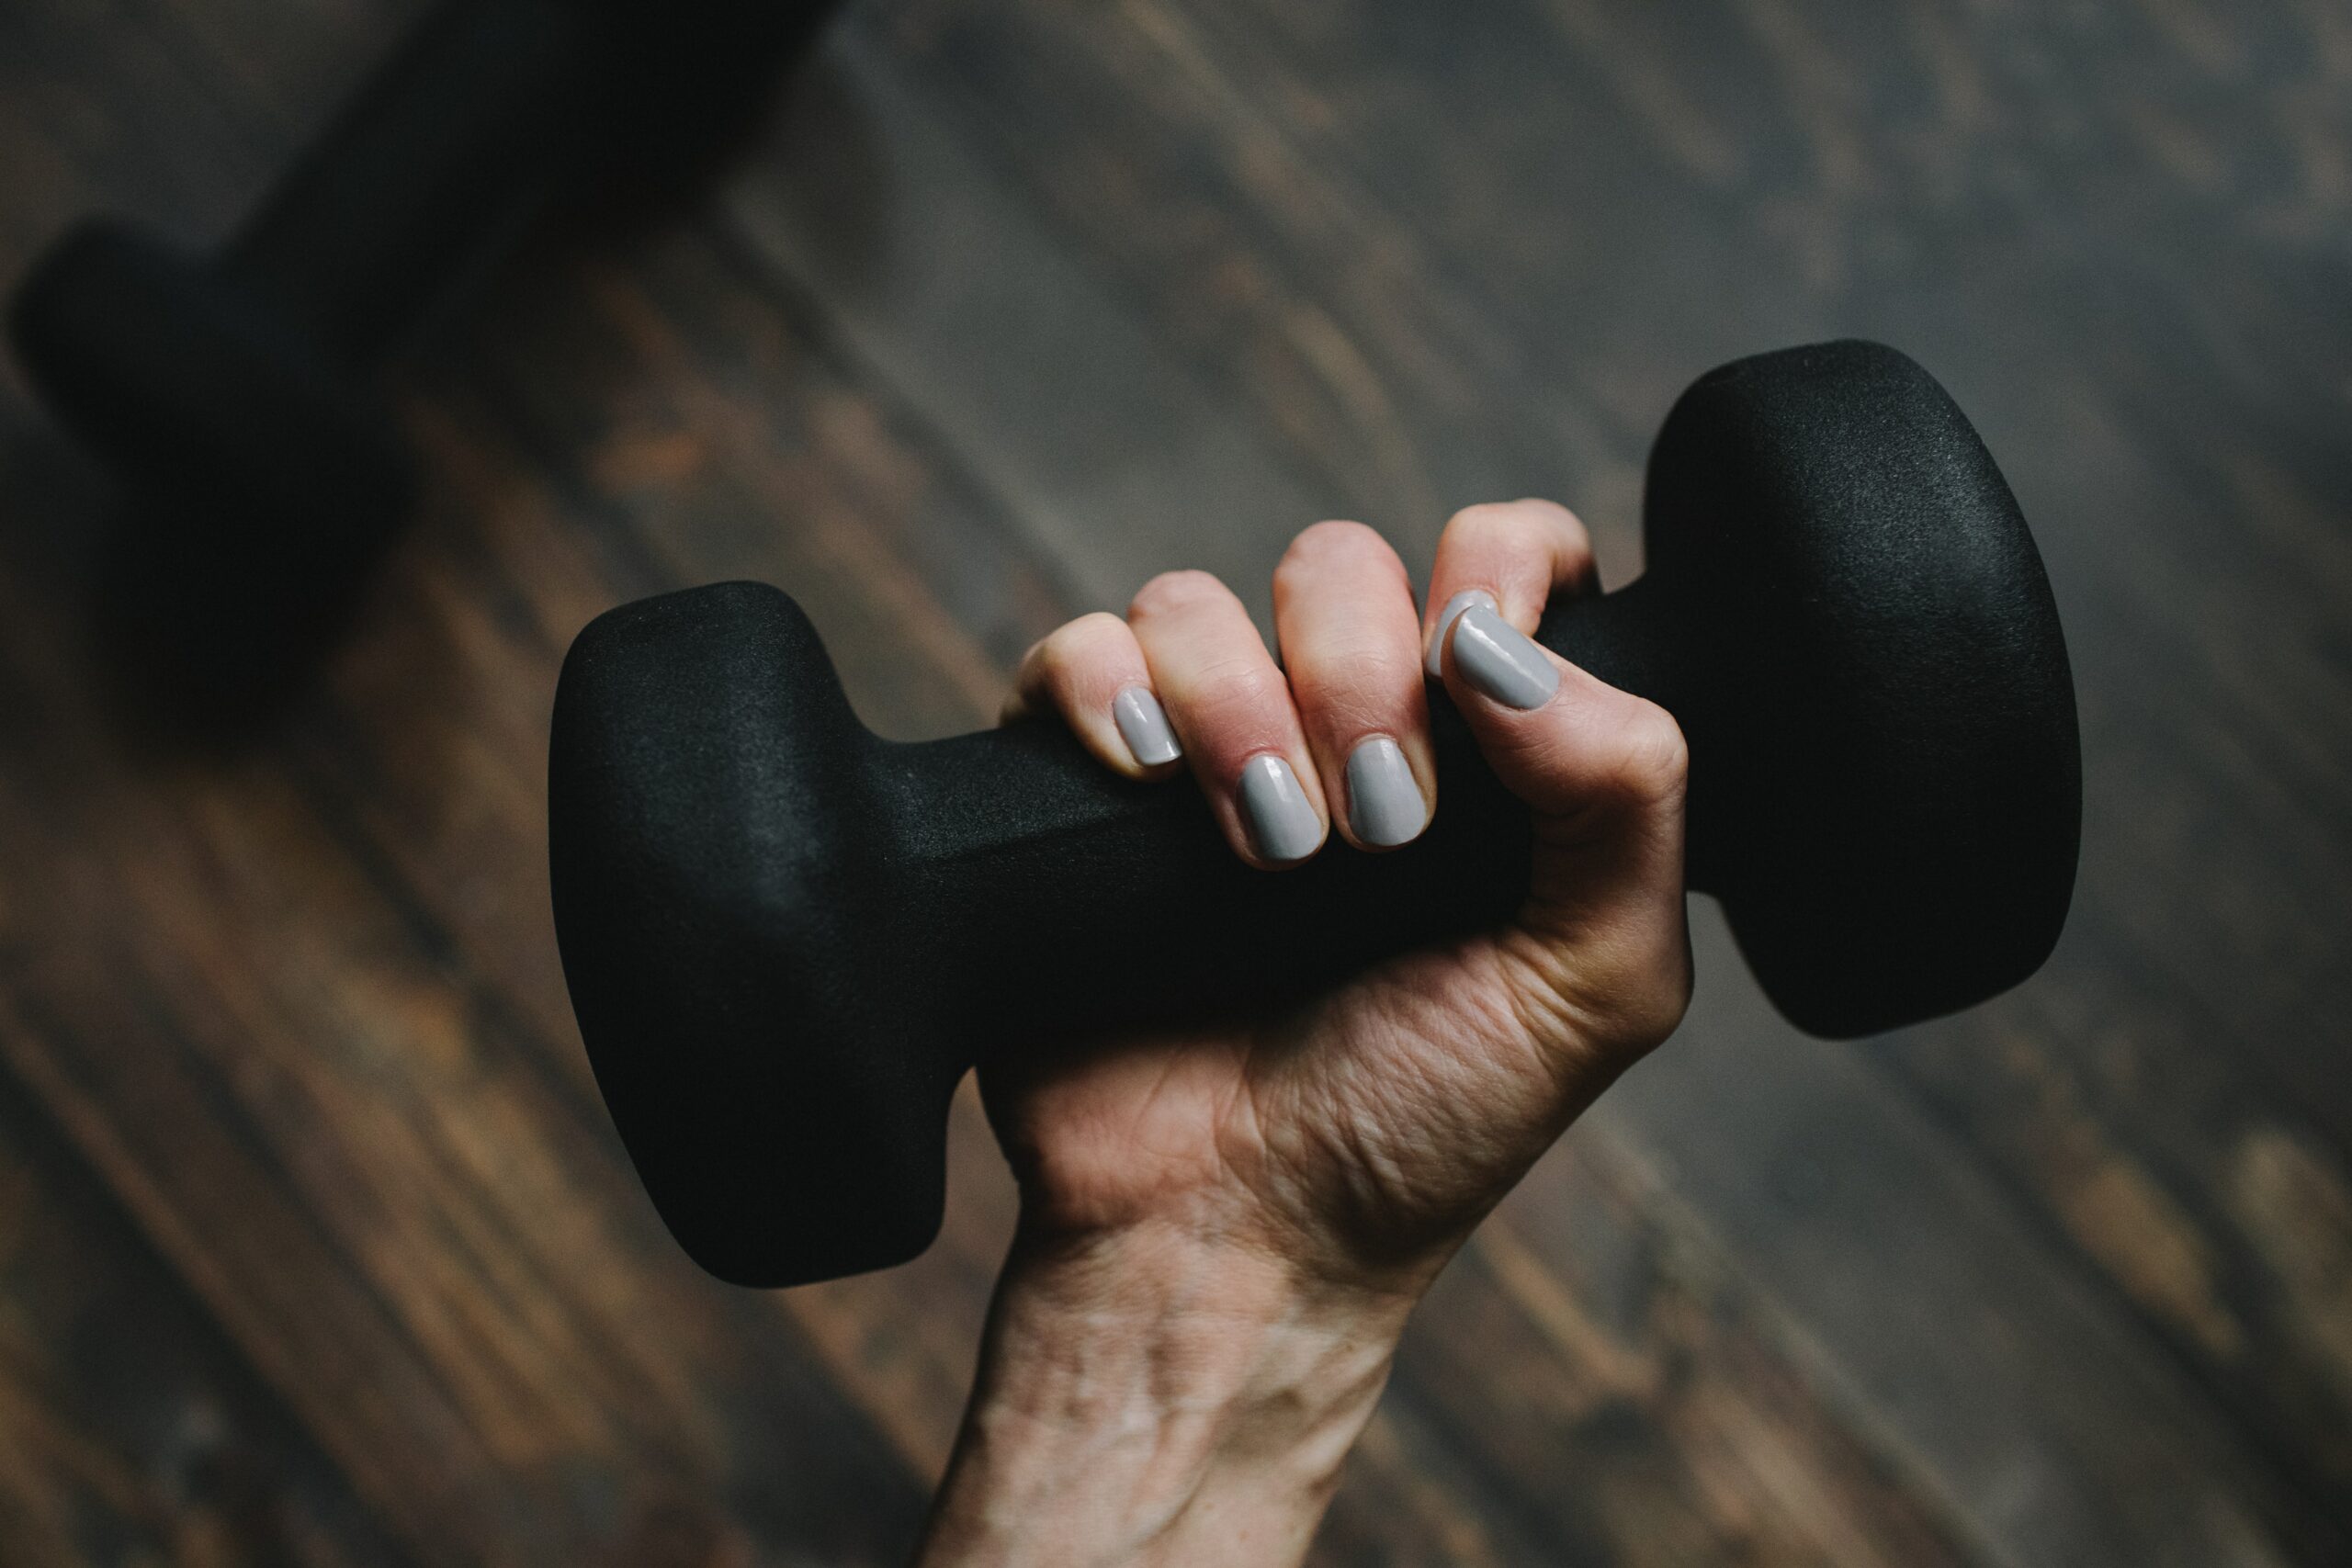 Grip strength may help predict depression